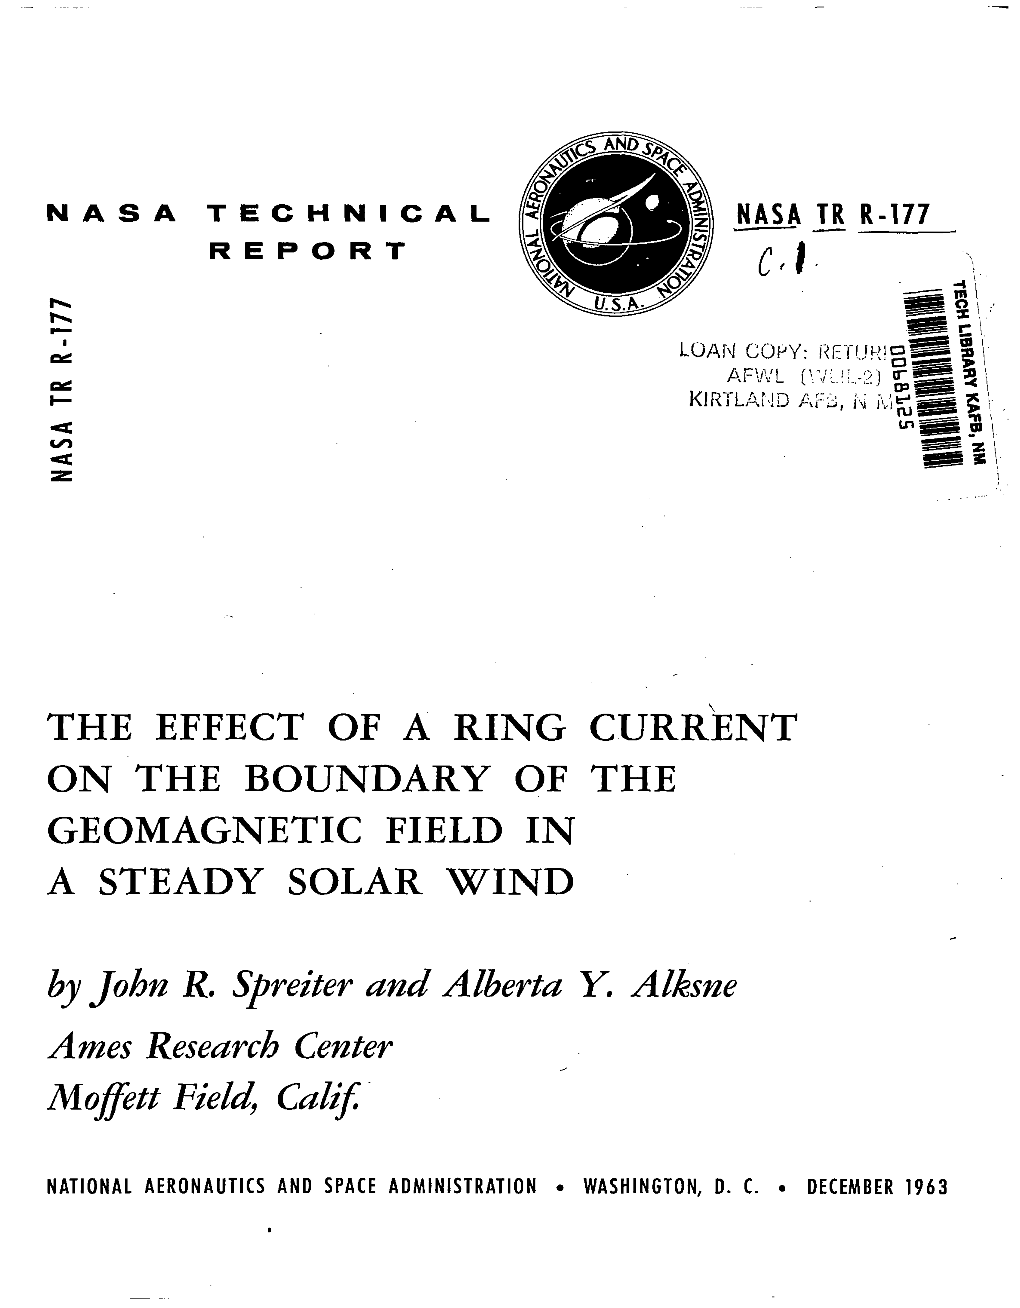 THE EFFECT of a RING CURRENT ON'the BOUNDARY of the GEOMAGNETIC FIELD in ASTEADY SOLAR WIND by John R